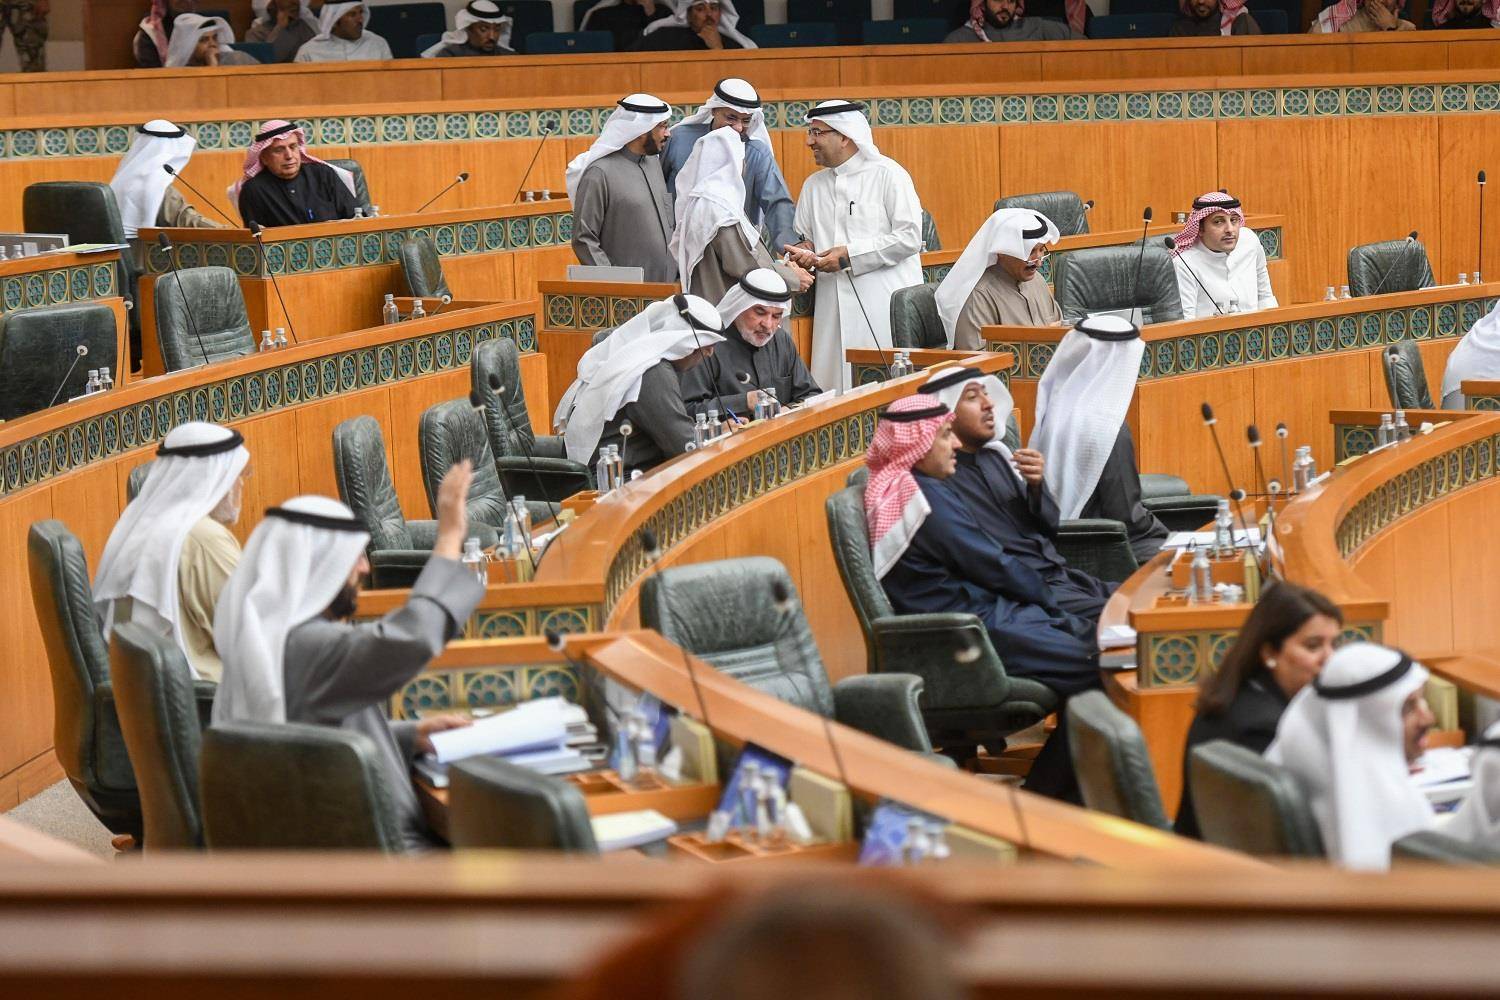 Kuwait parliament in session. — Courtesy photo